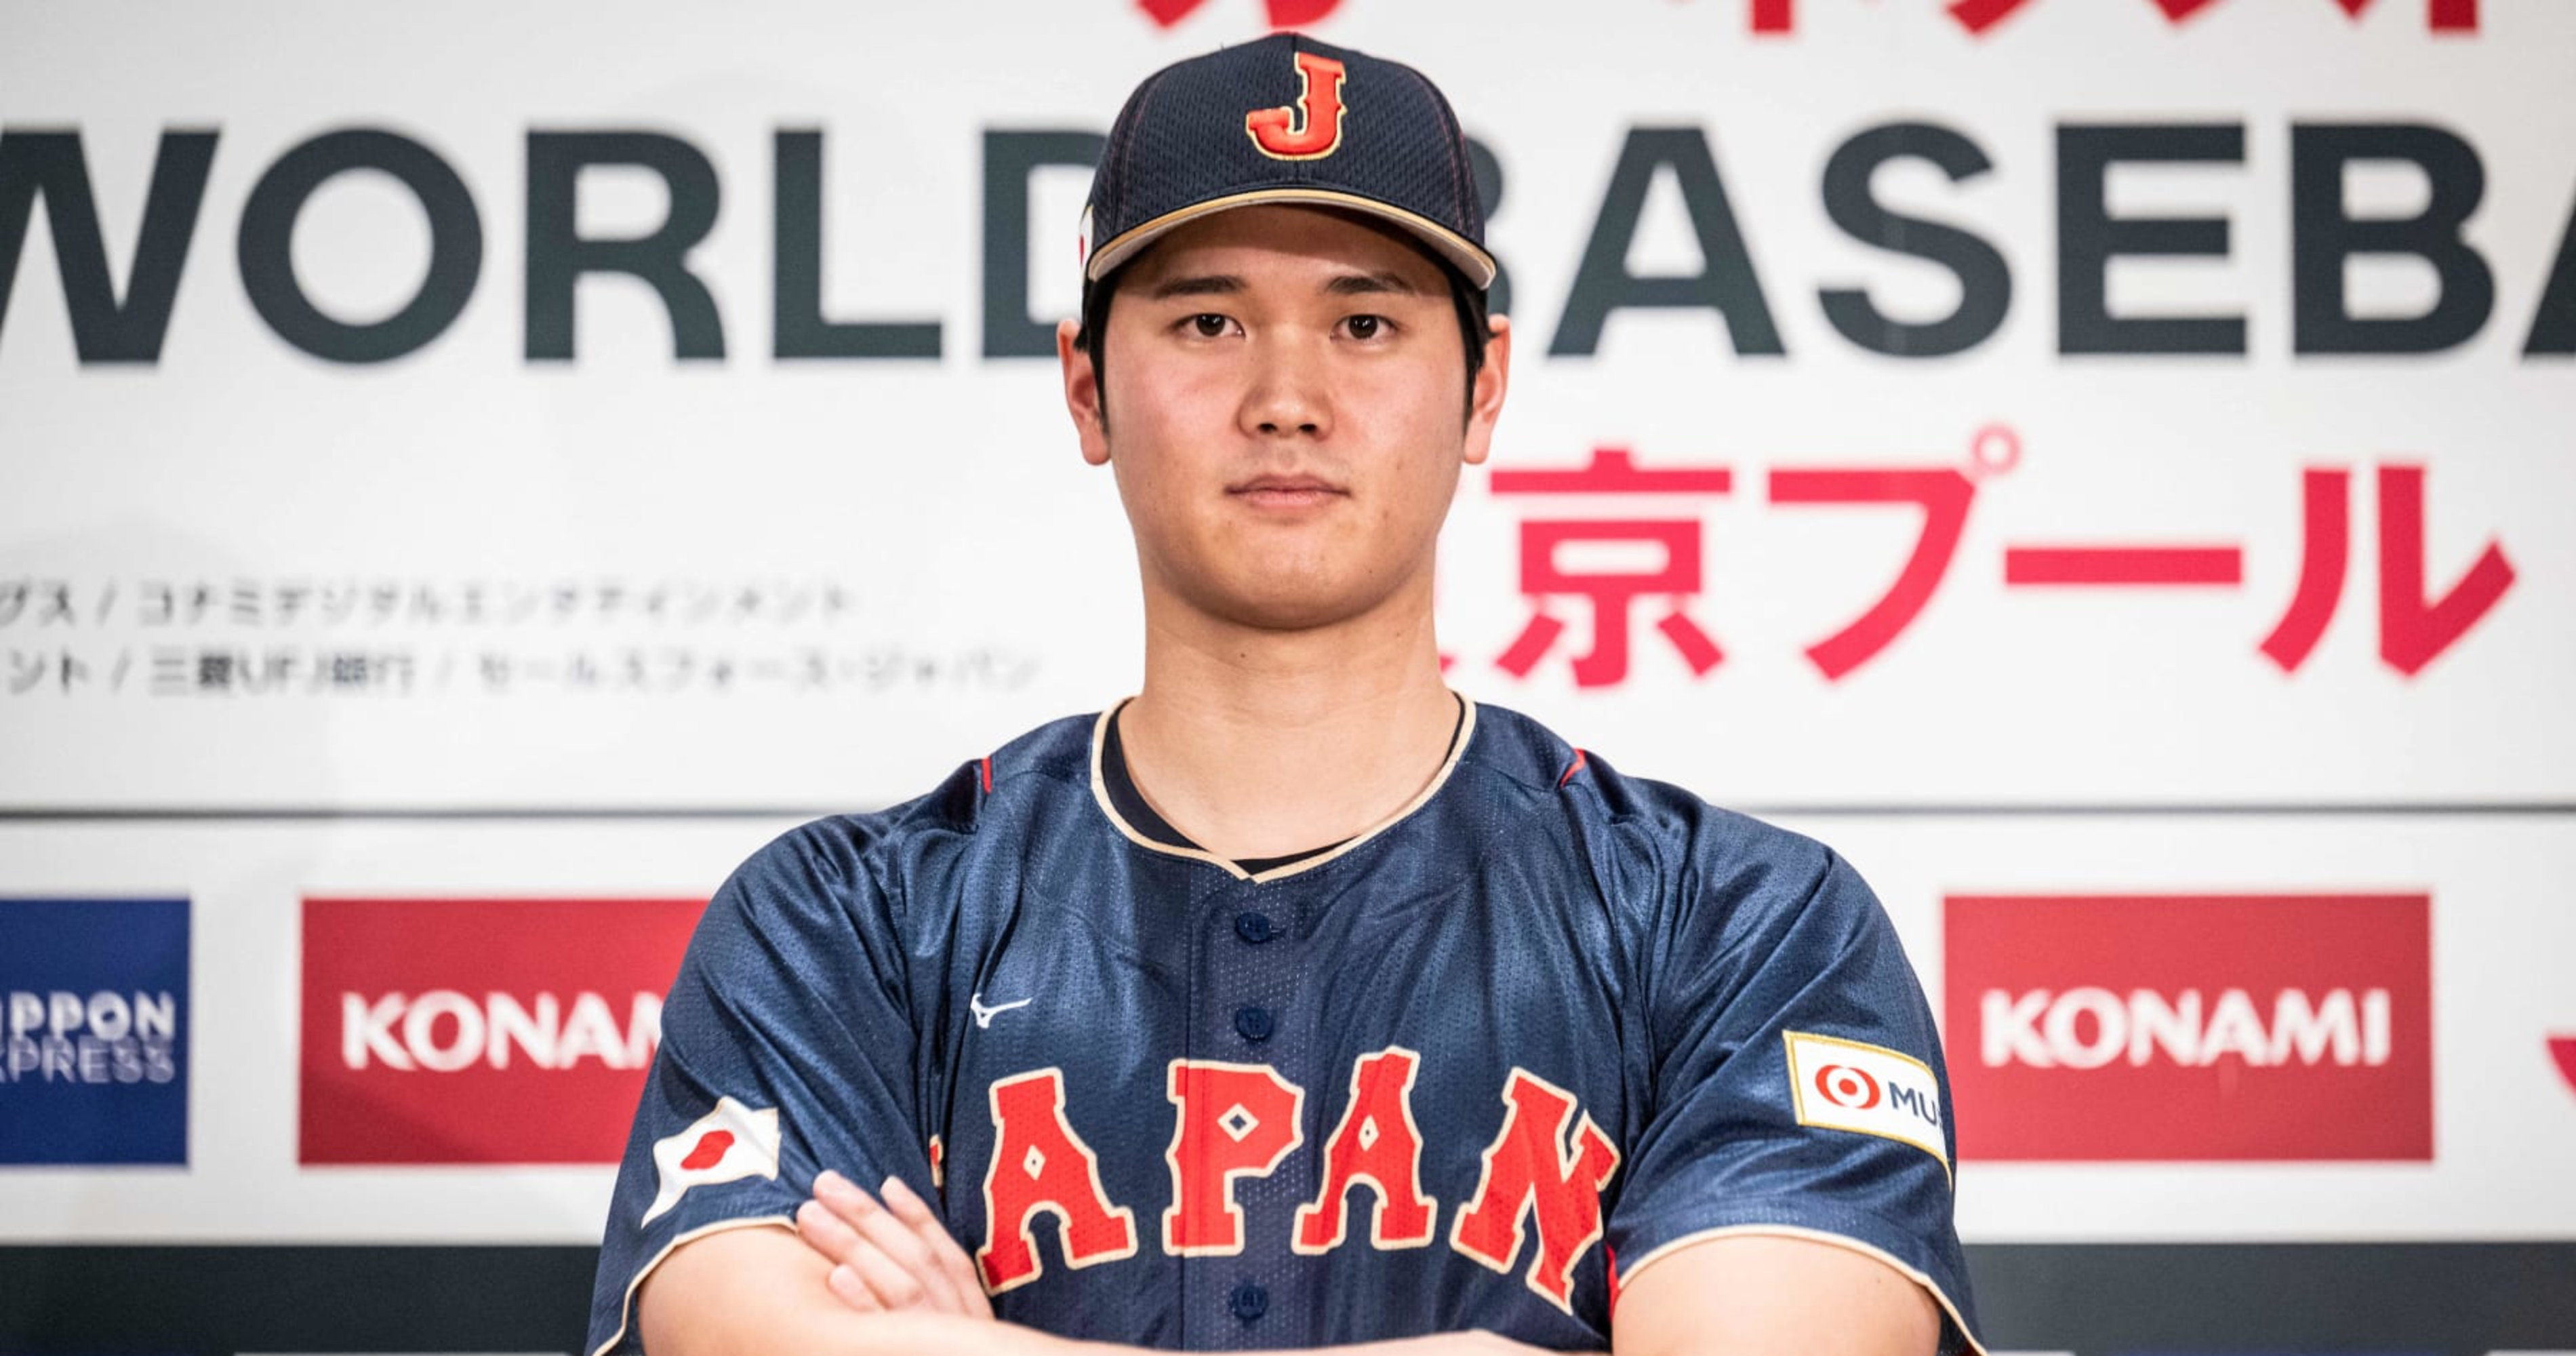 Japan's Two-Way Baseball Superstar Wants to Play in MLB in 2018